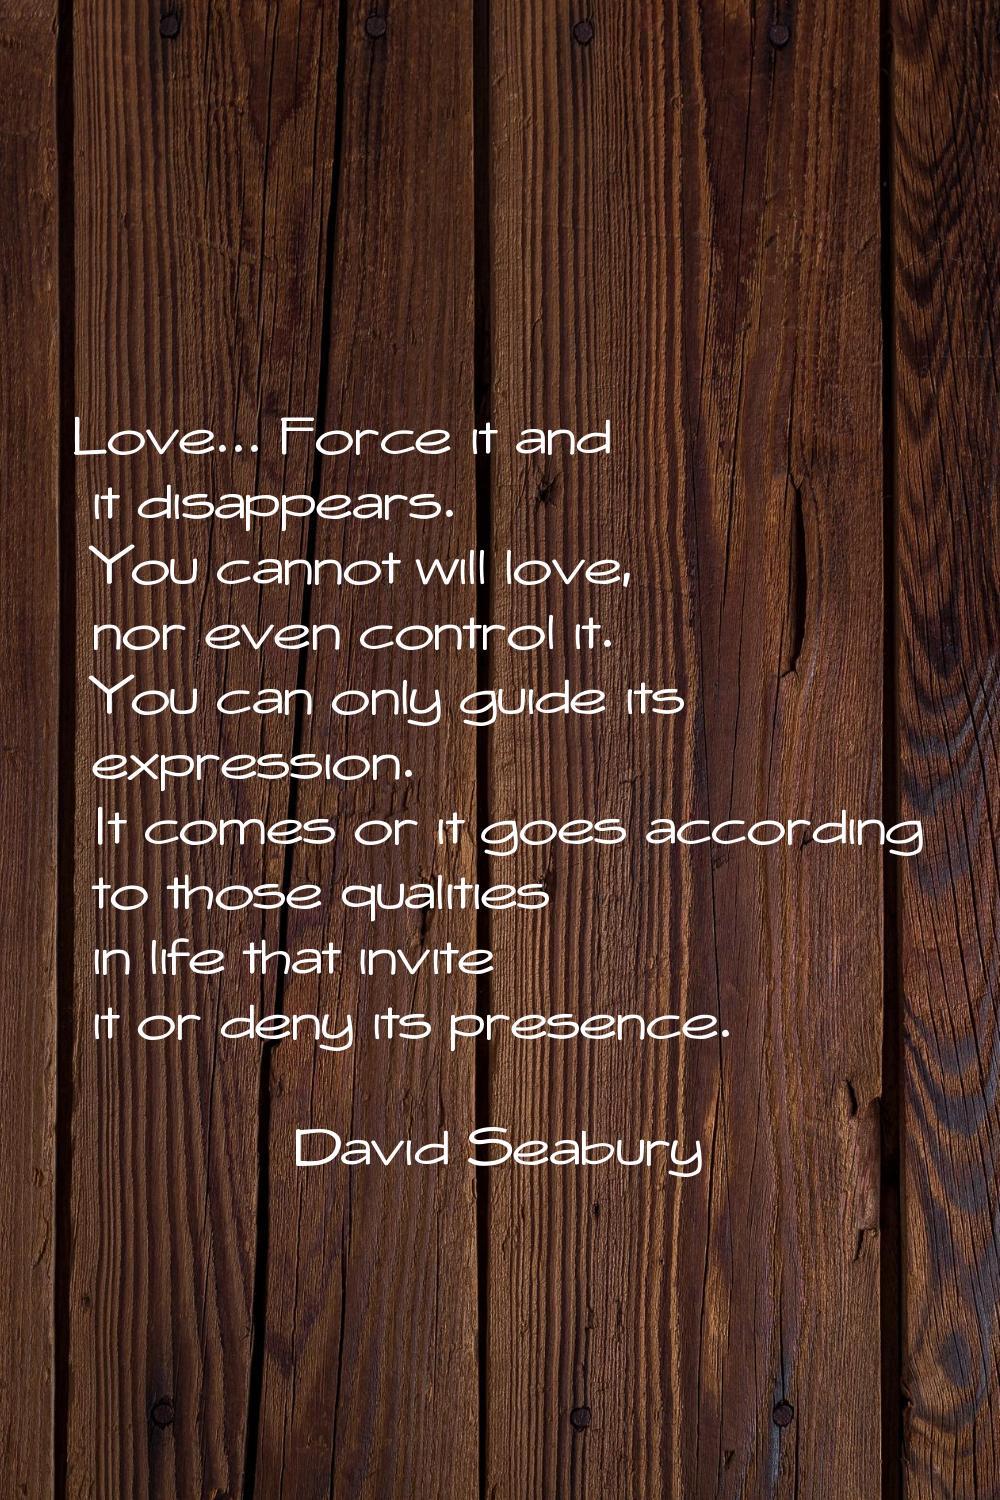 Love... Force it and it disappears. You cannot will love, nor even control it. You can only guide i